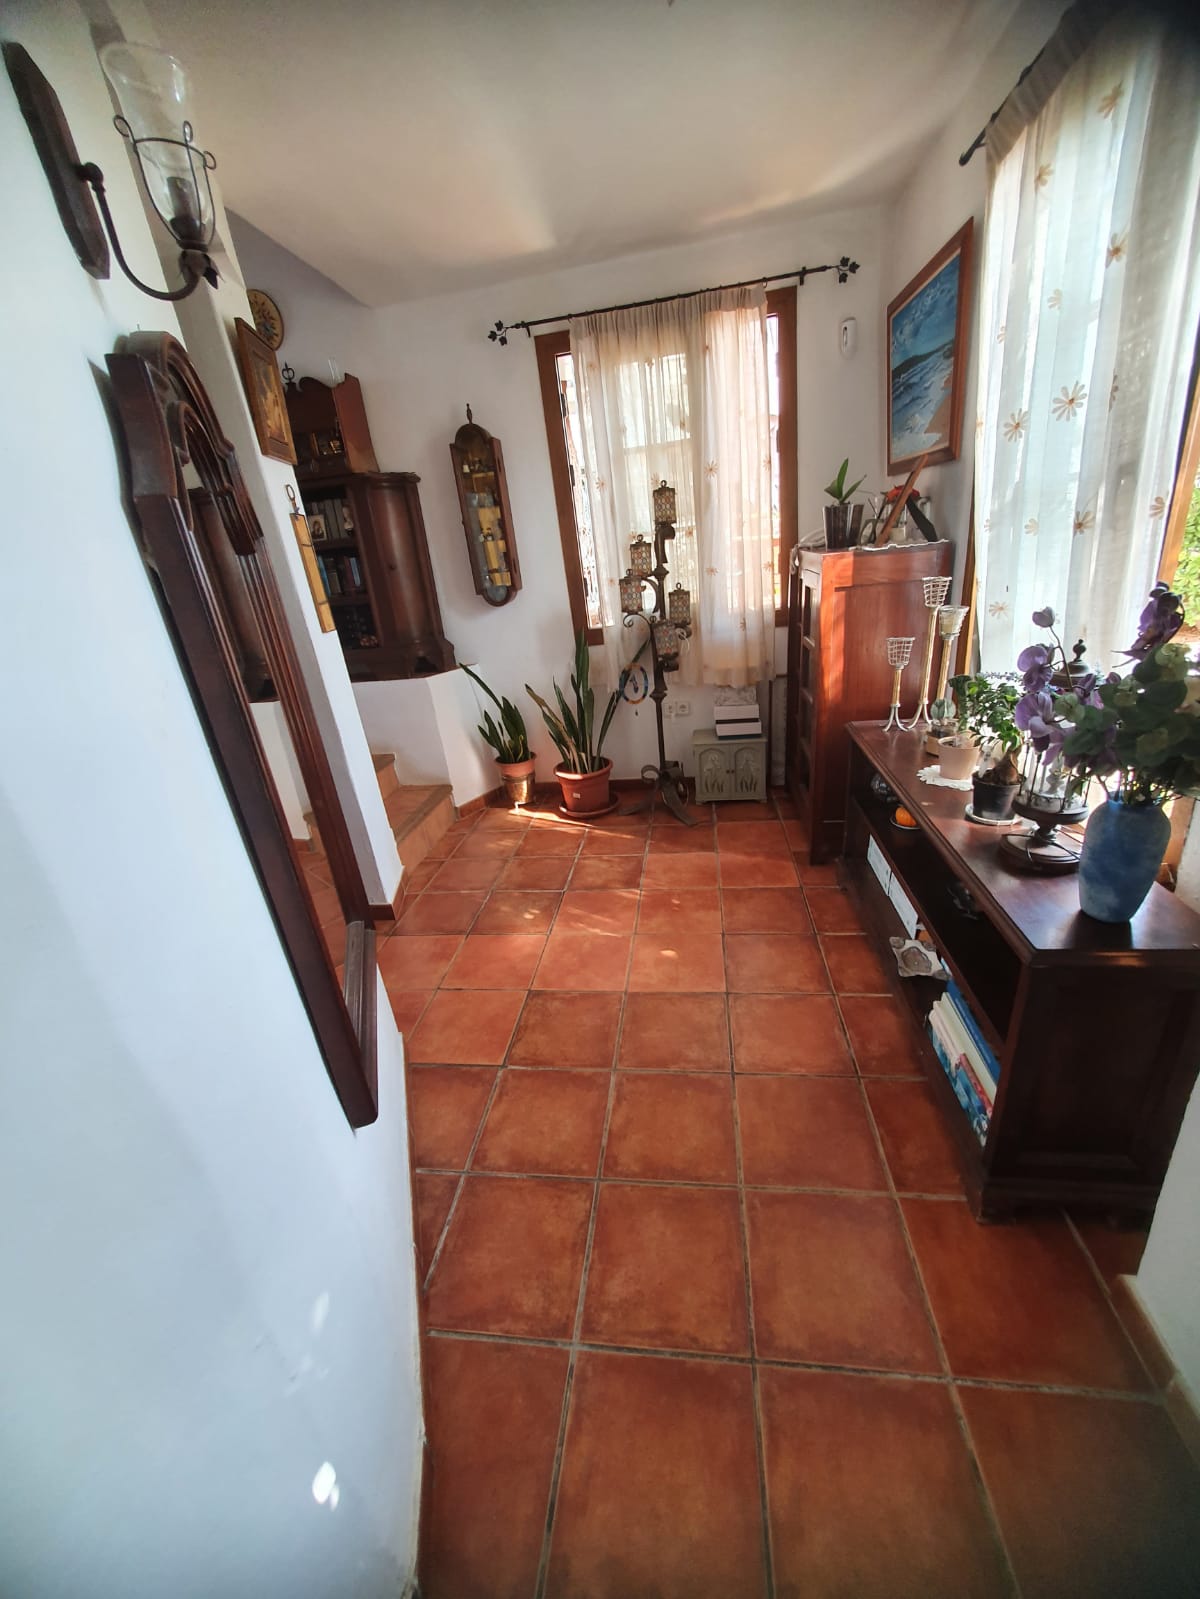 Spacious property for sale near Talamanca beach in need of renovation